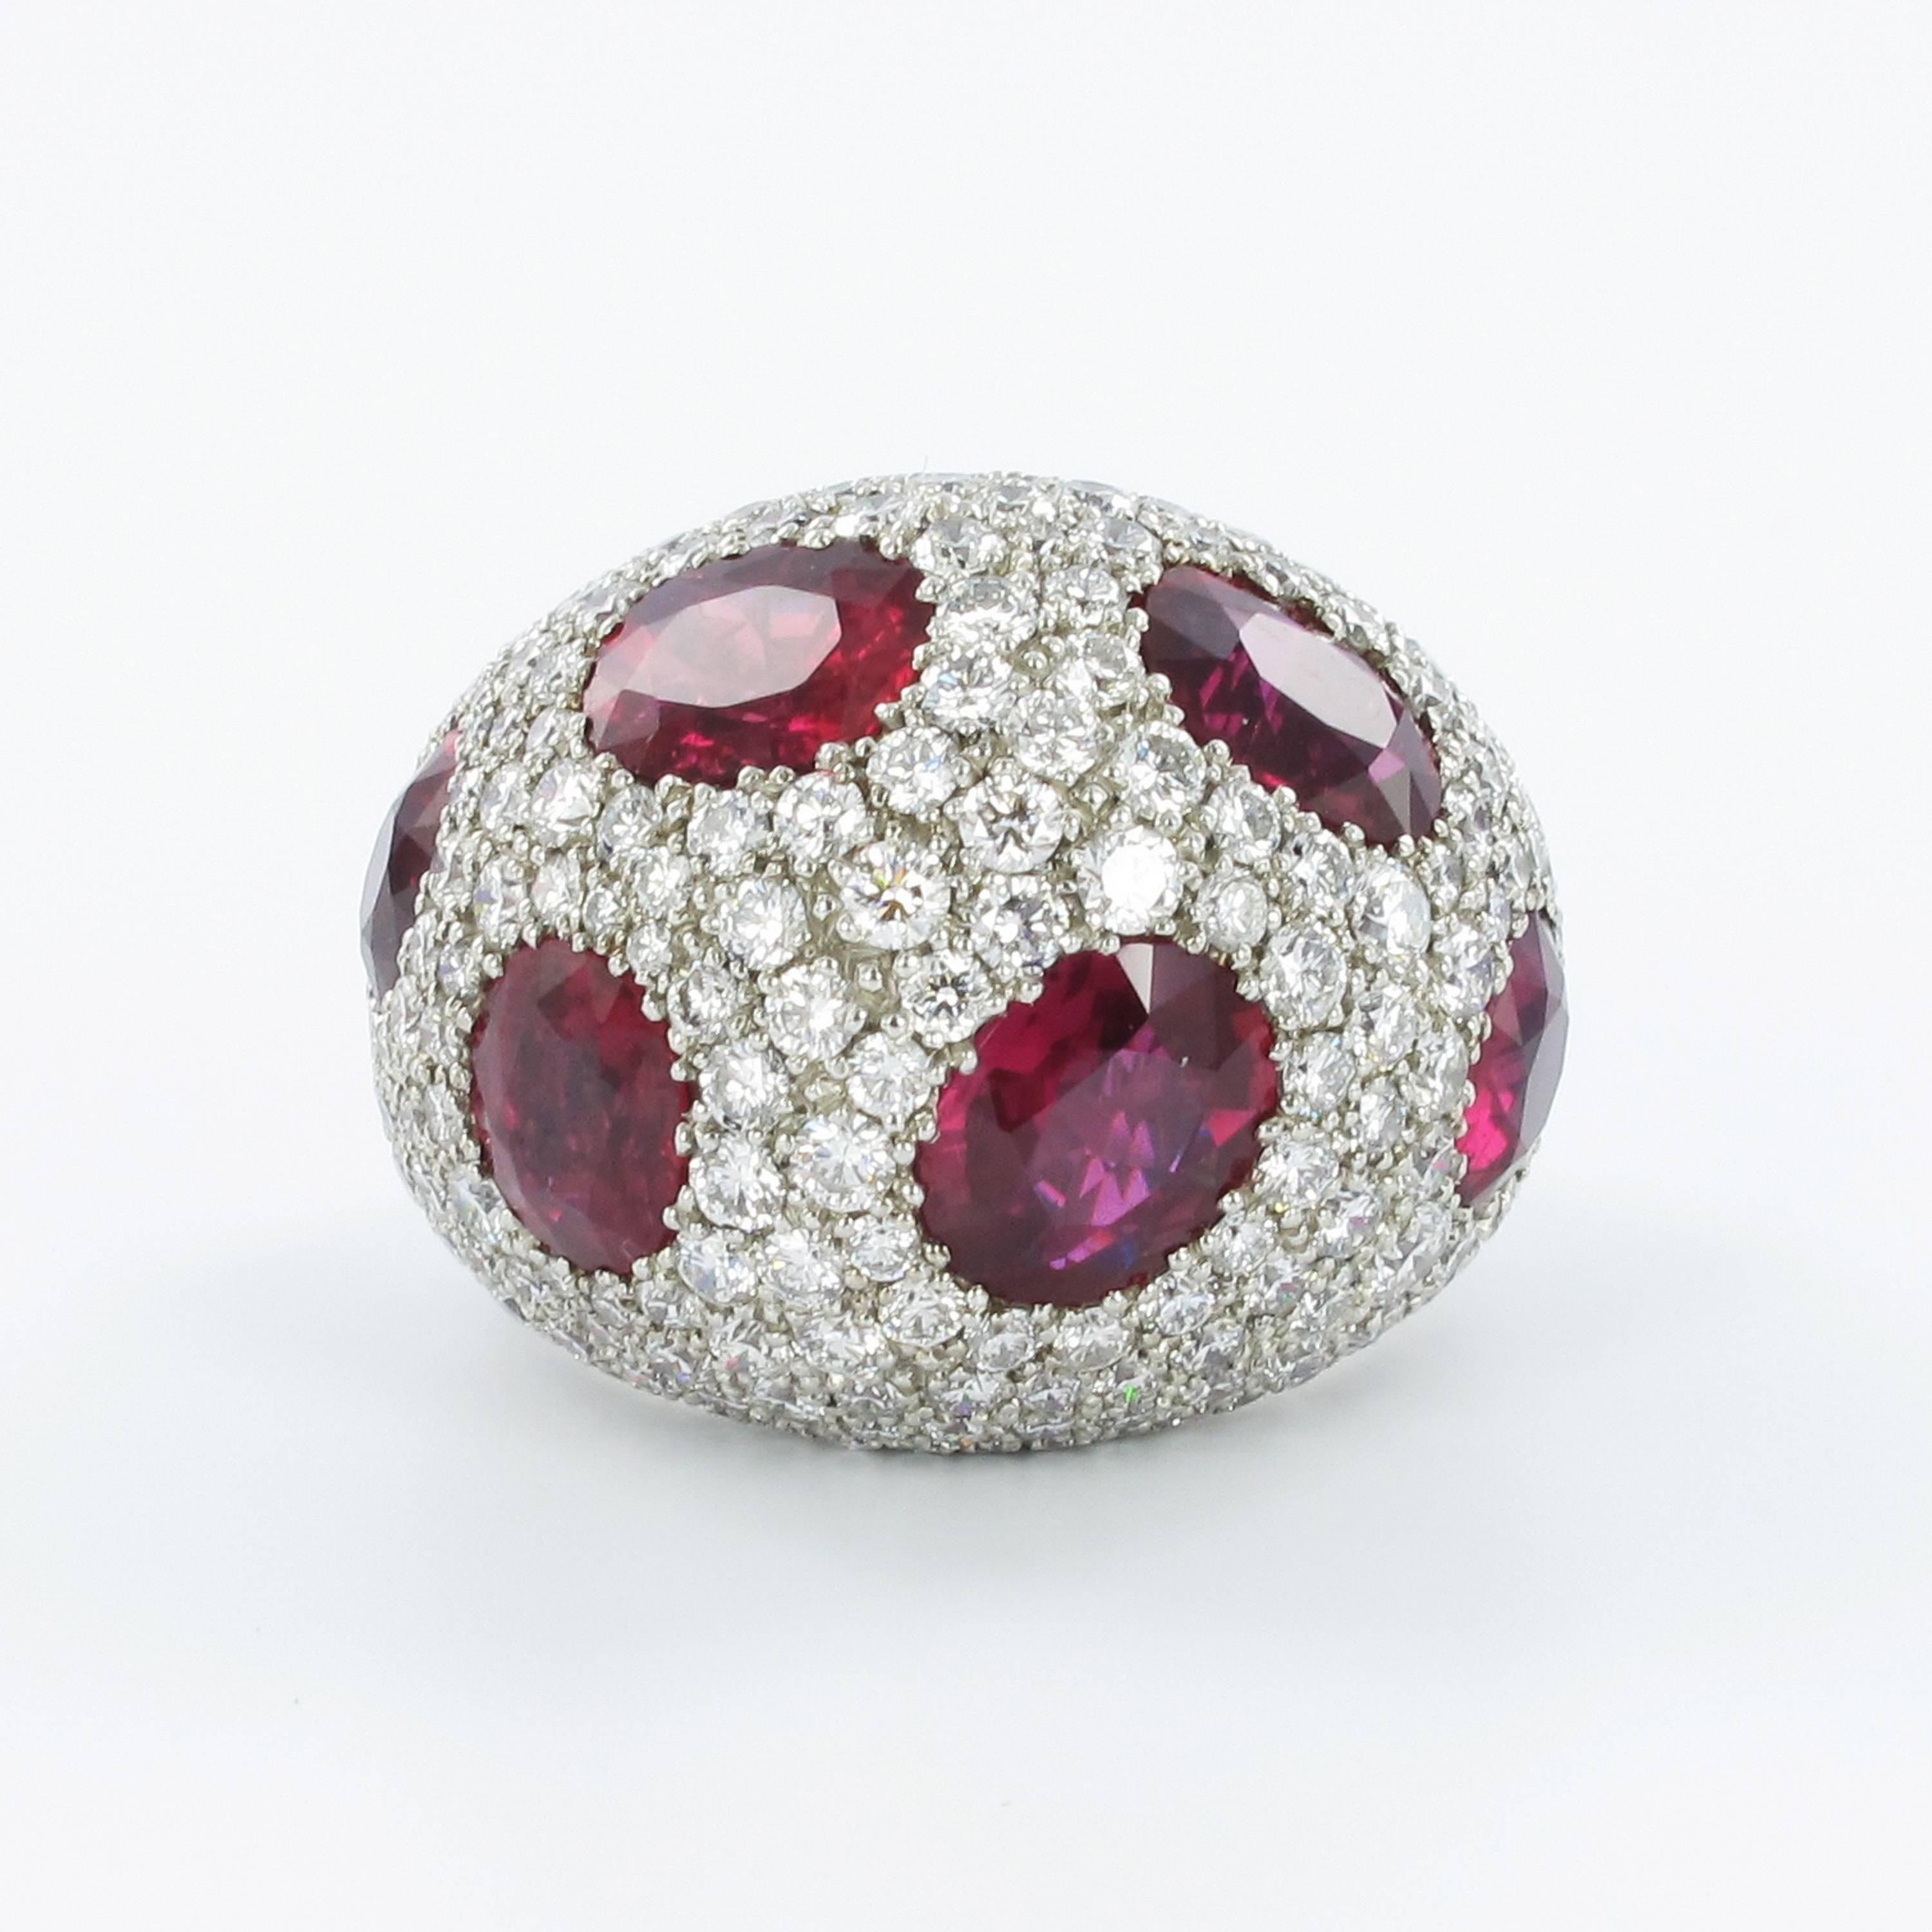 This voluminous dome ring is manufactured in platinum 950. The 6 certified, oval-cut rubies are of Mozambican origin and show no signs of any treatment. Total weight of the rubies is approximately 12 ct. The ring is completed with 233 brilliant-cut